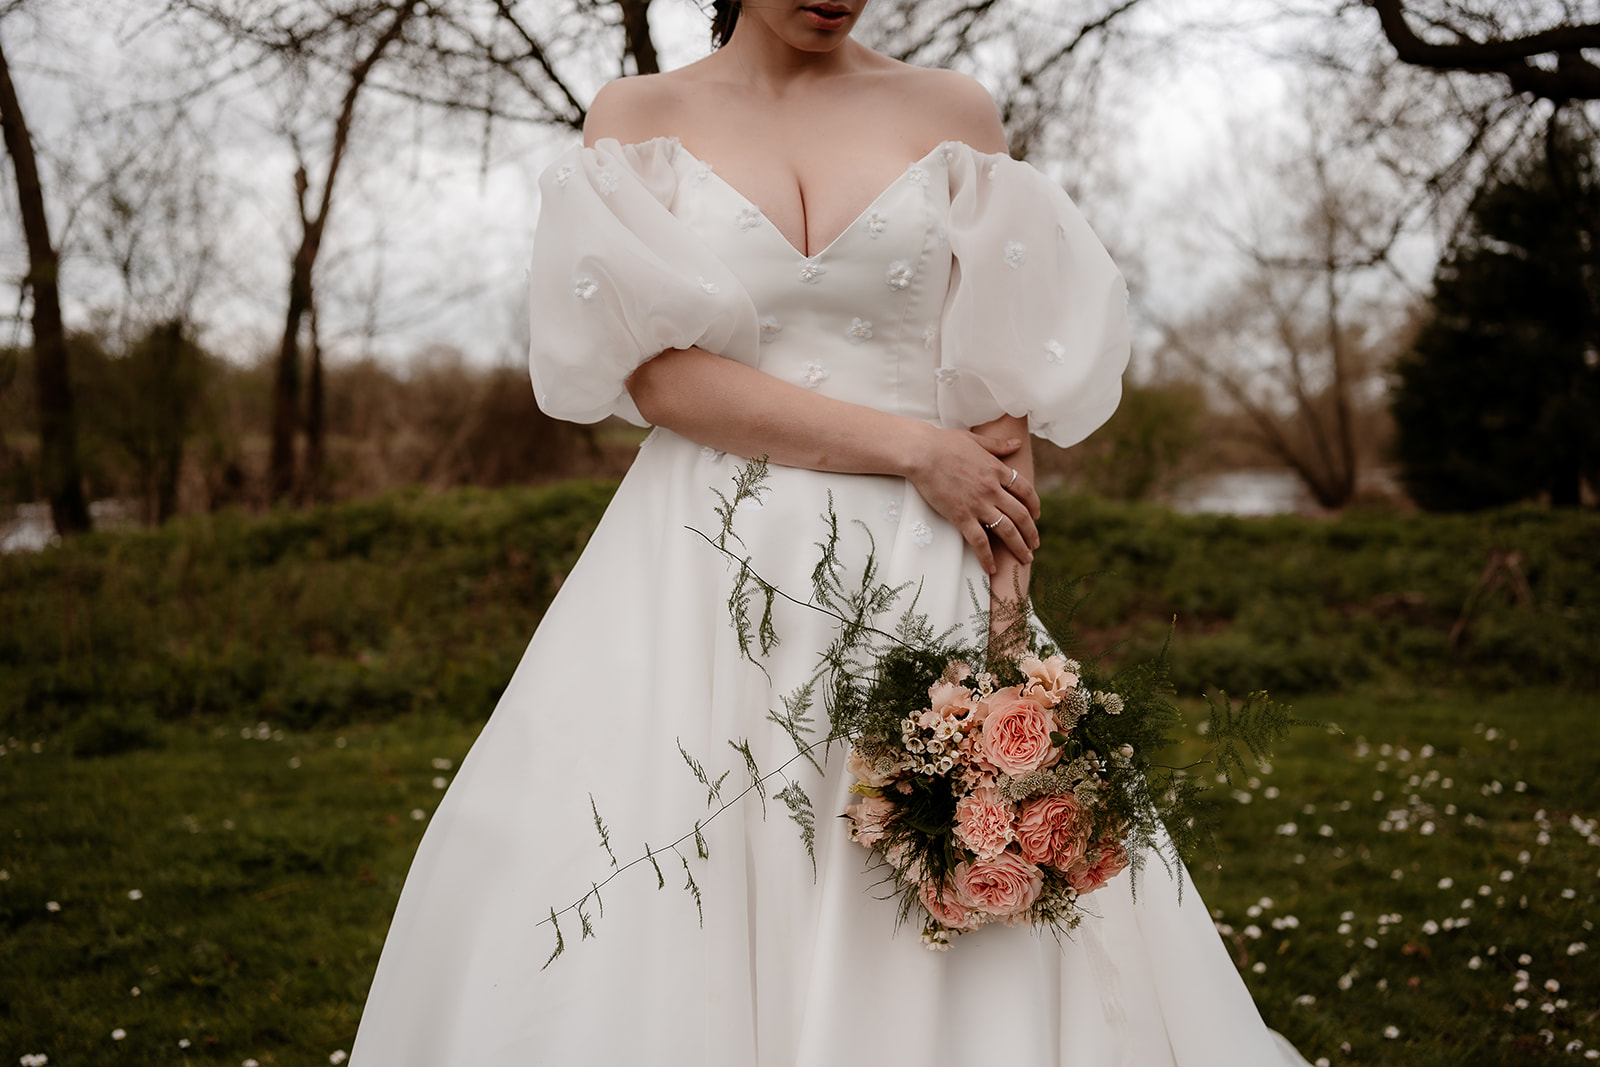 Shot of a bride's torso and arms as she stands holding her bouquet against her white dress with puff sleeves